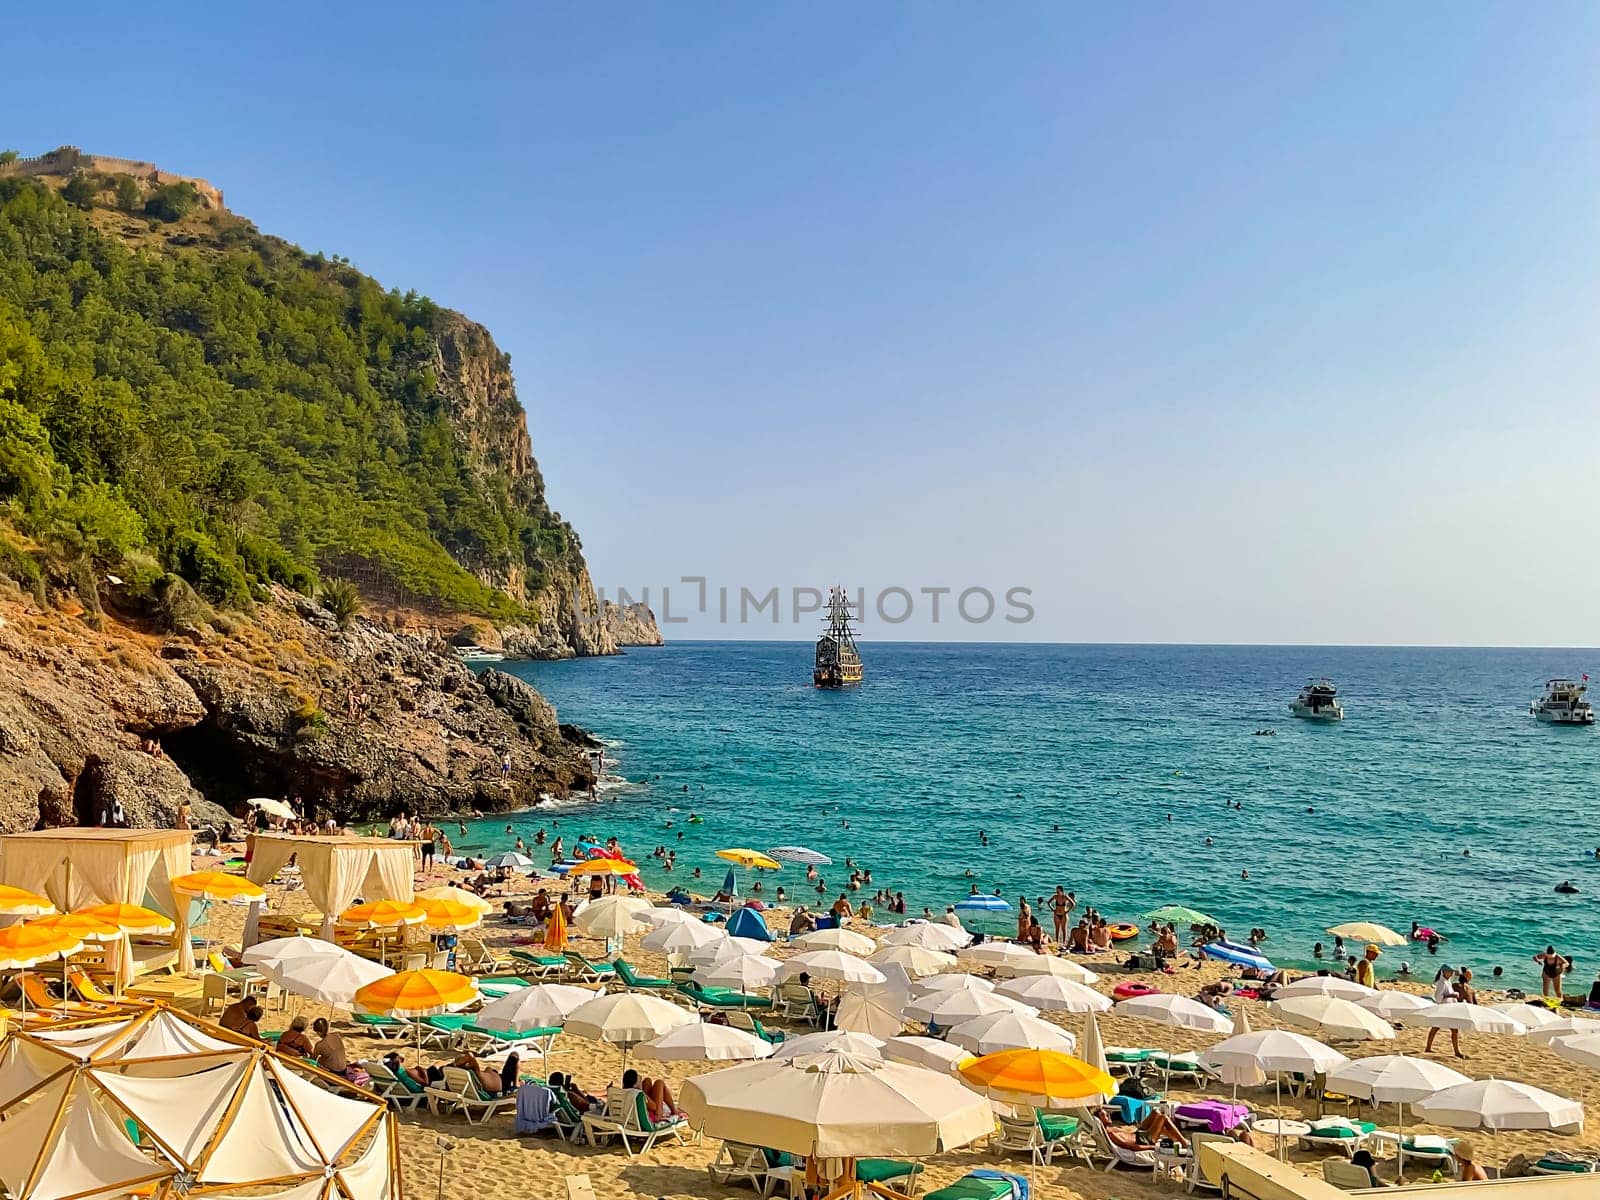 Cleopatra beach in Alanya with beach umbrellas, people and mountain view. Sunny day on the beach. High quality photo